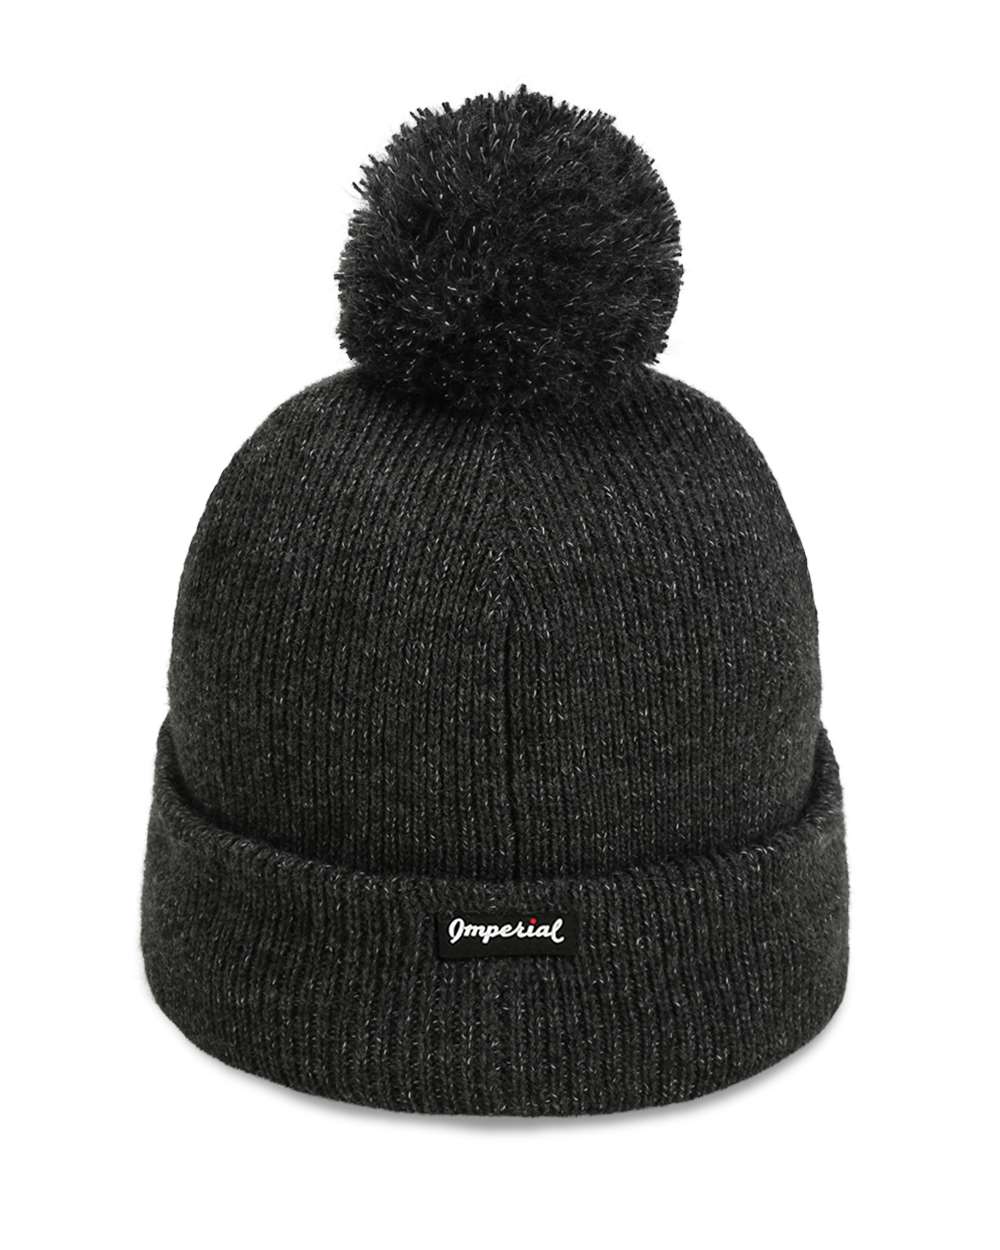 Imperial 6015 - The Mammoth Pom Hat